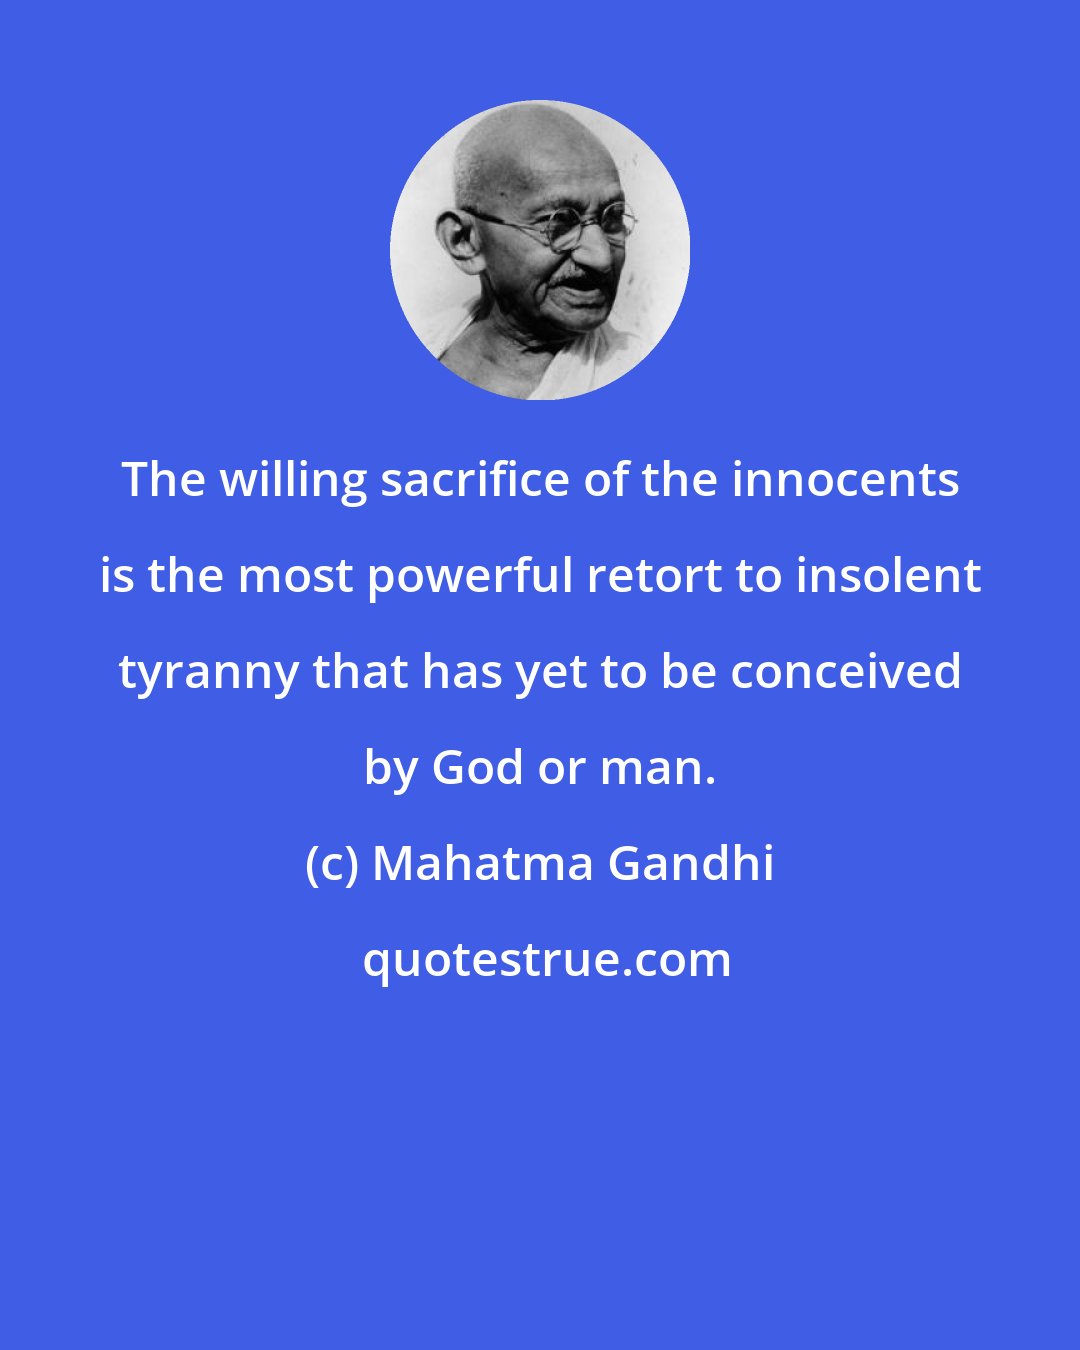 Mahatma Gandhi: The willing sacrifice of the innocents is the most powerful retort to insolent tyranny that has yet to be conceived by God or man.